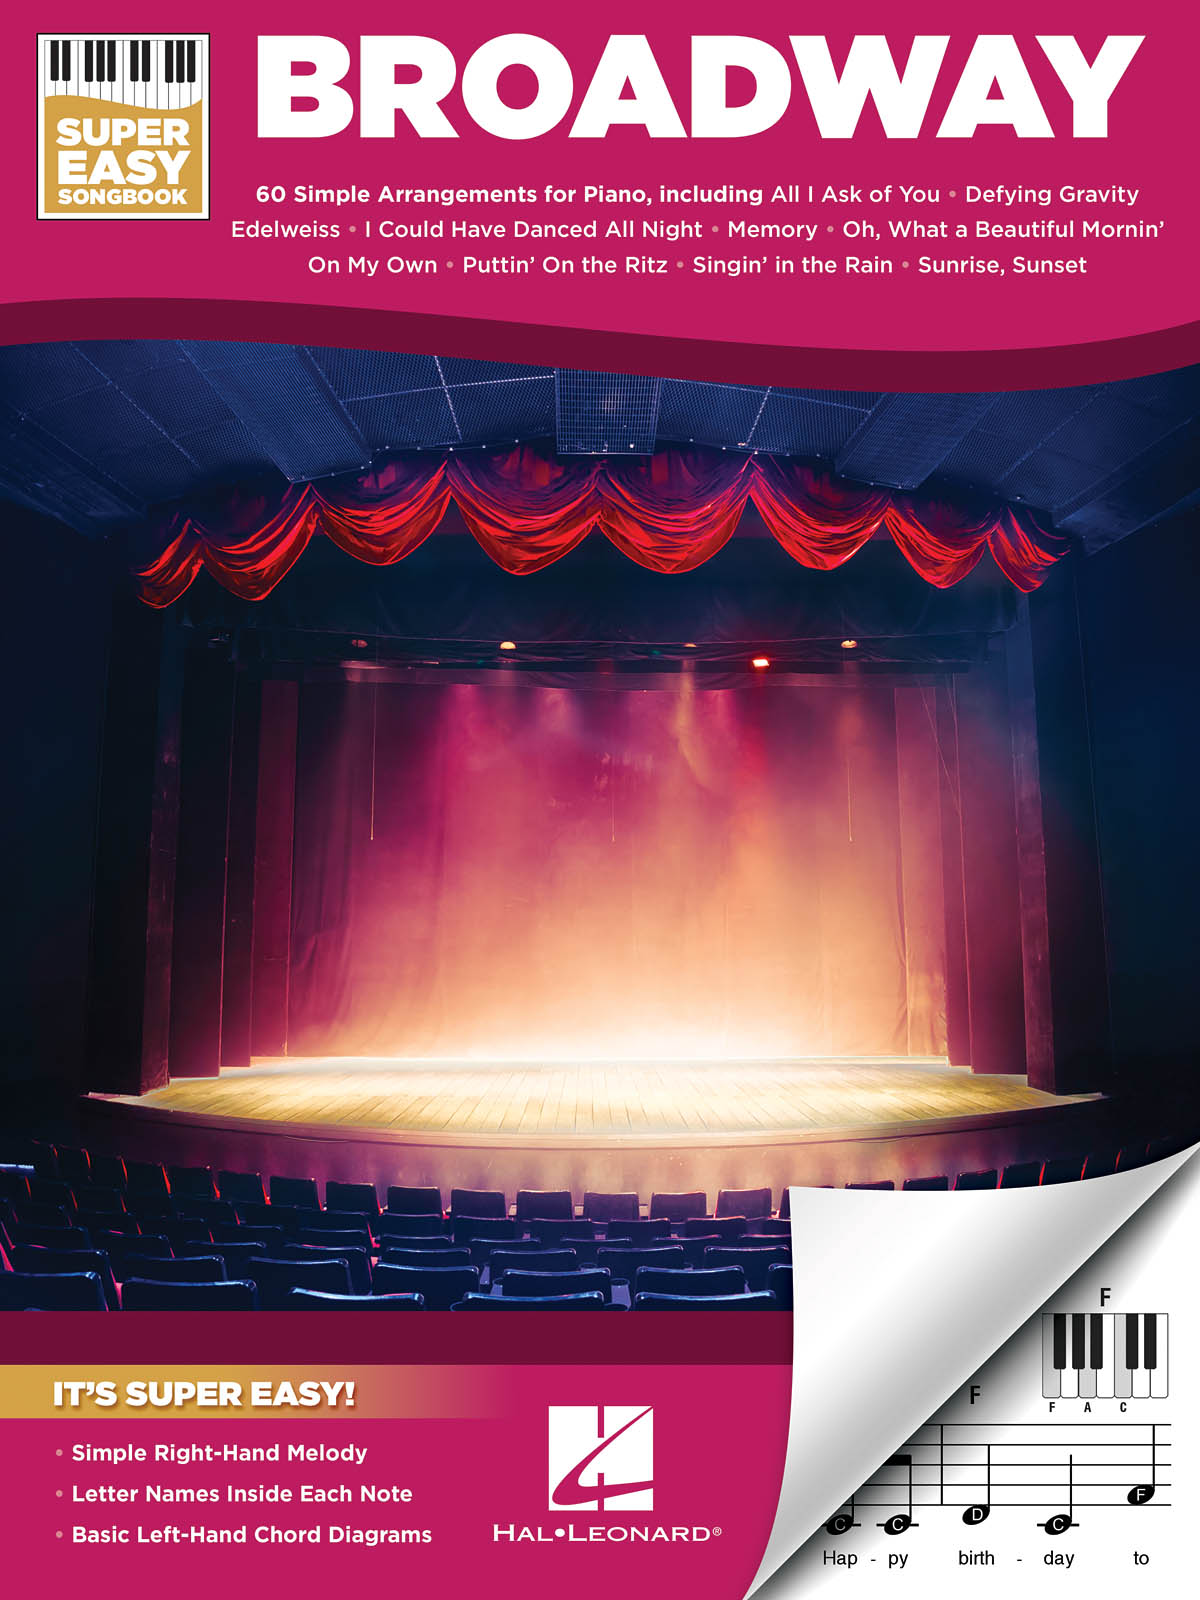 Broadway - Super Easy Songbook: Piano: Mixed Songbook